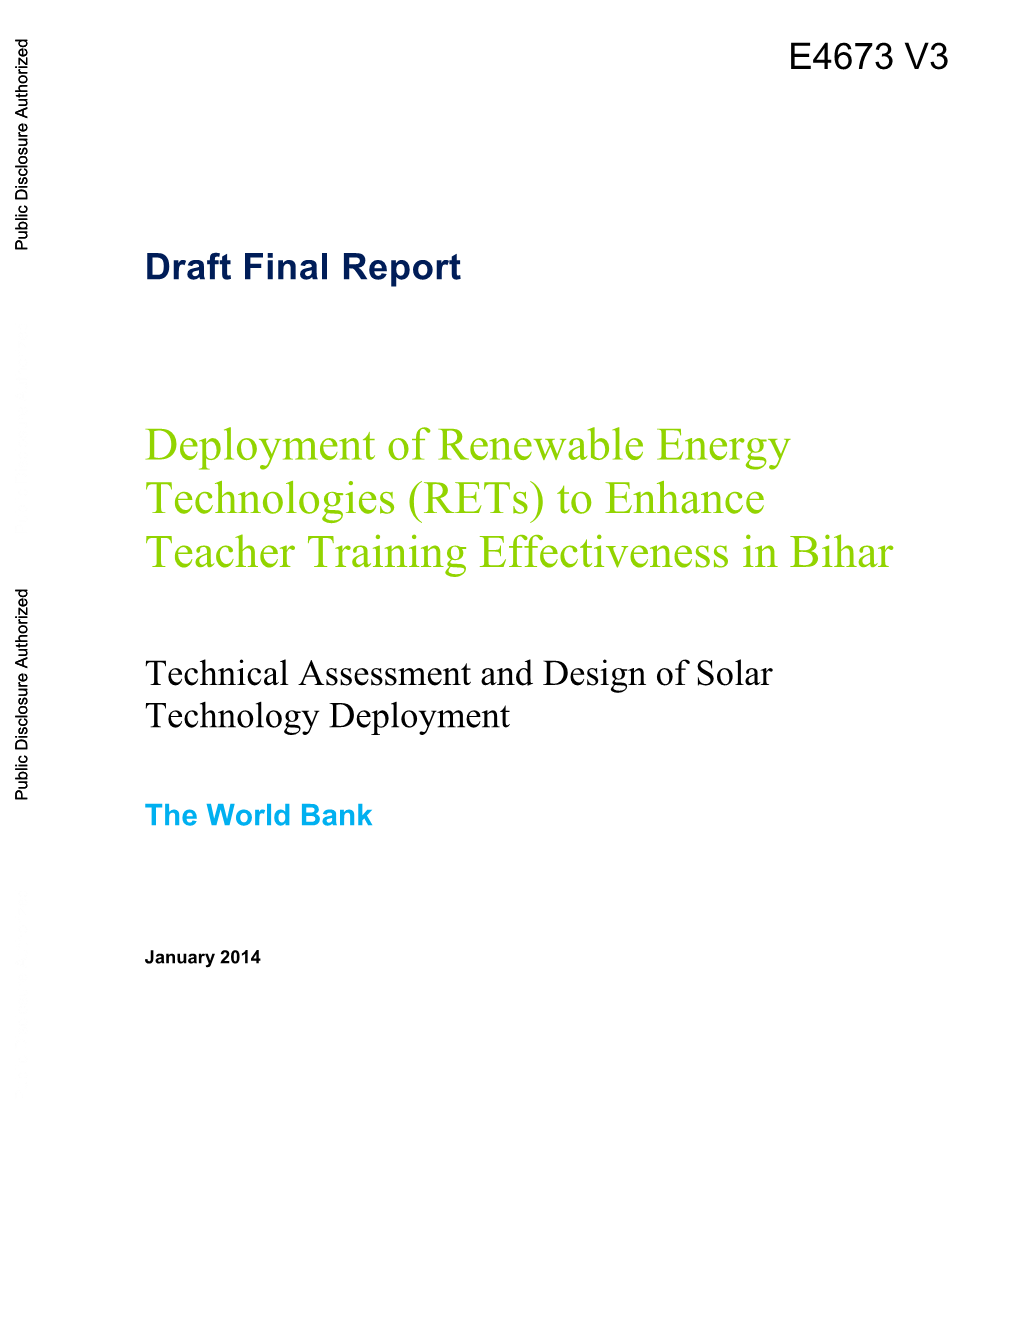 Technical Assessment and Design of Solar Technology Deployment